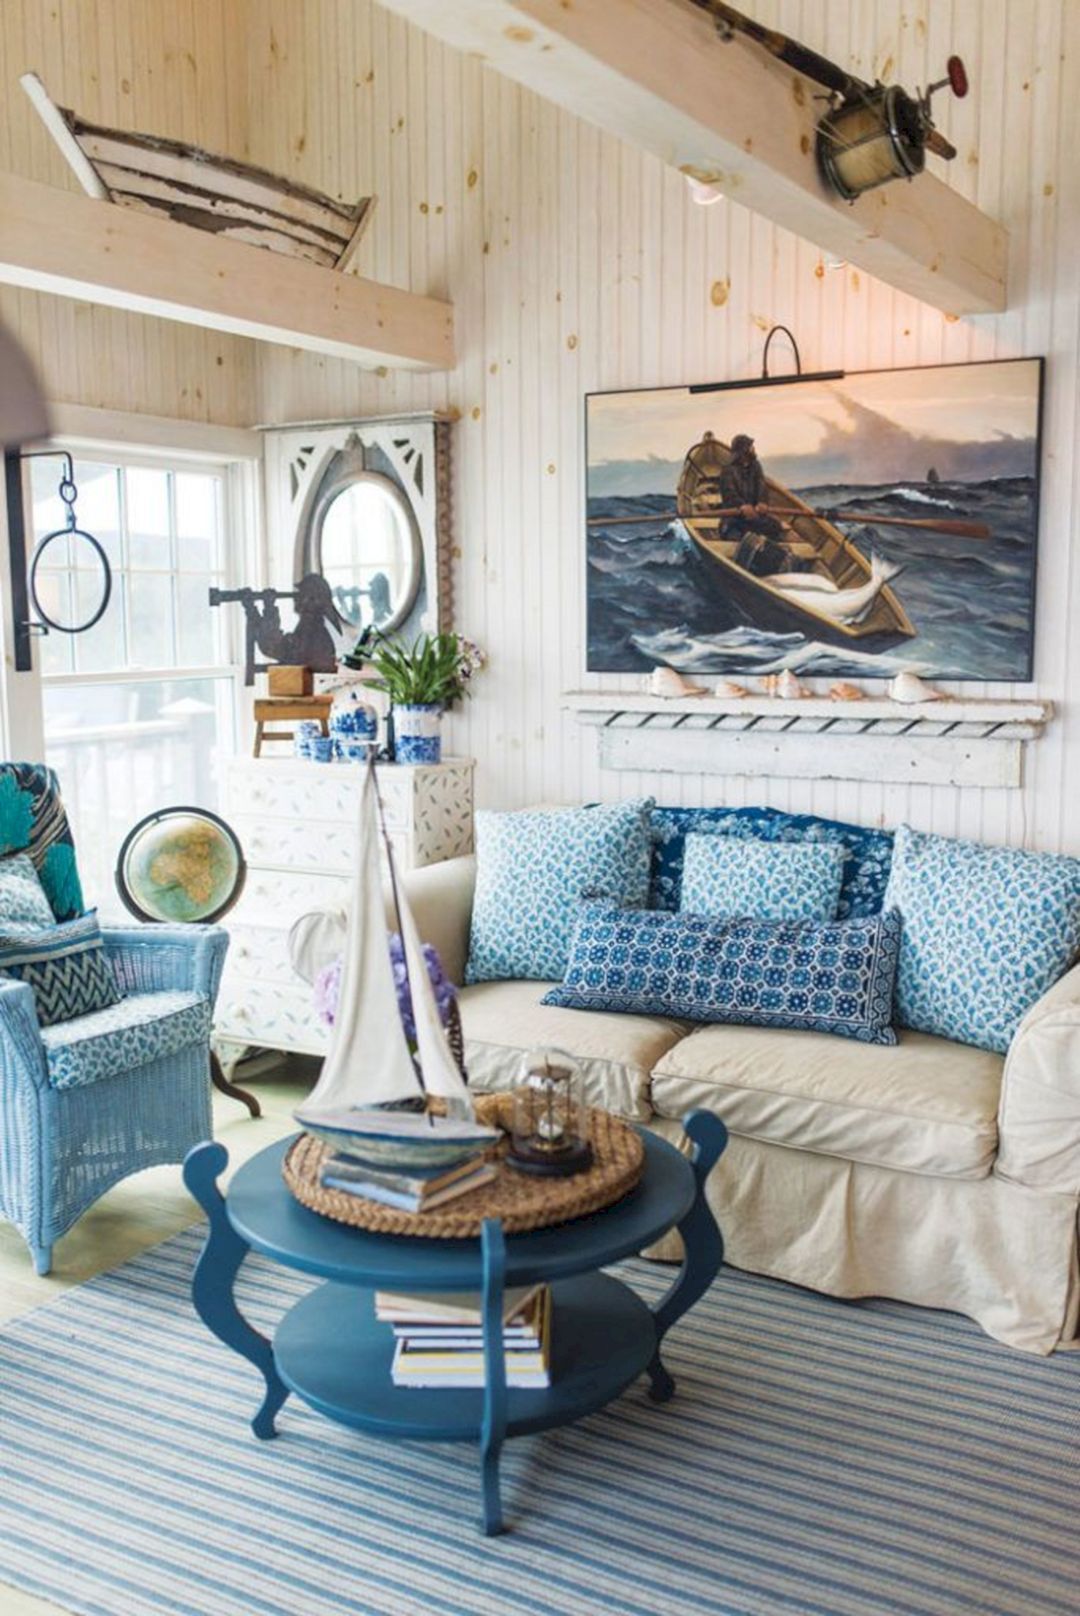 Coastal Chic Interior Design: 7 Tips For A Tranquil And Beachy Vibe